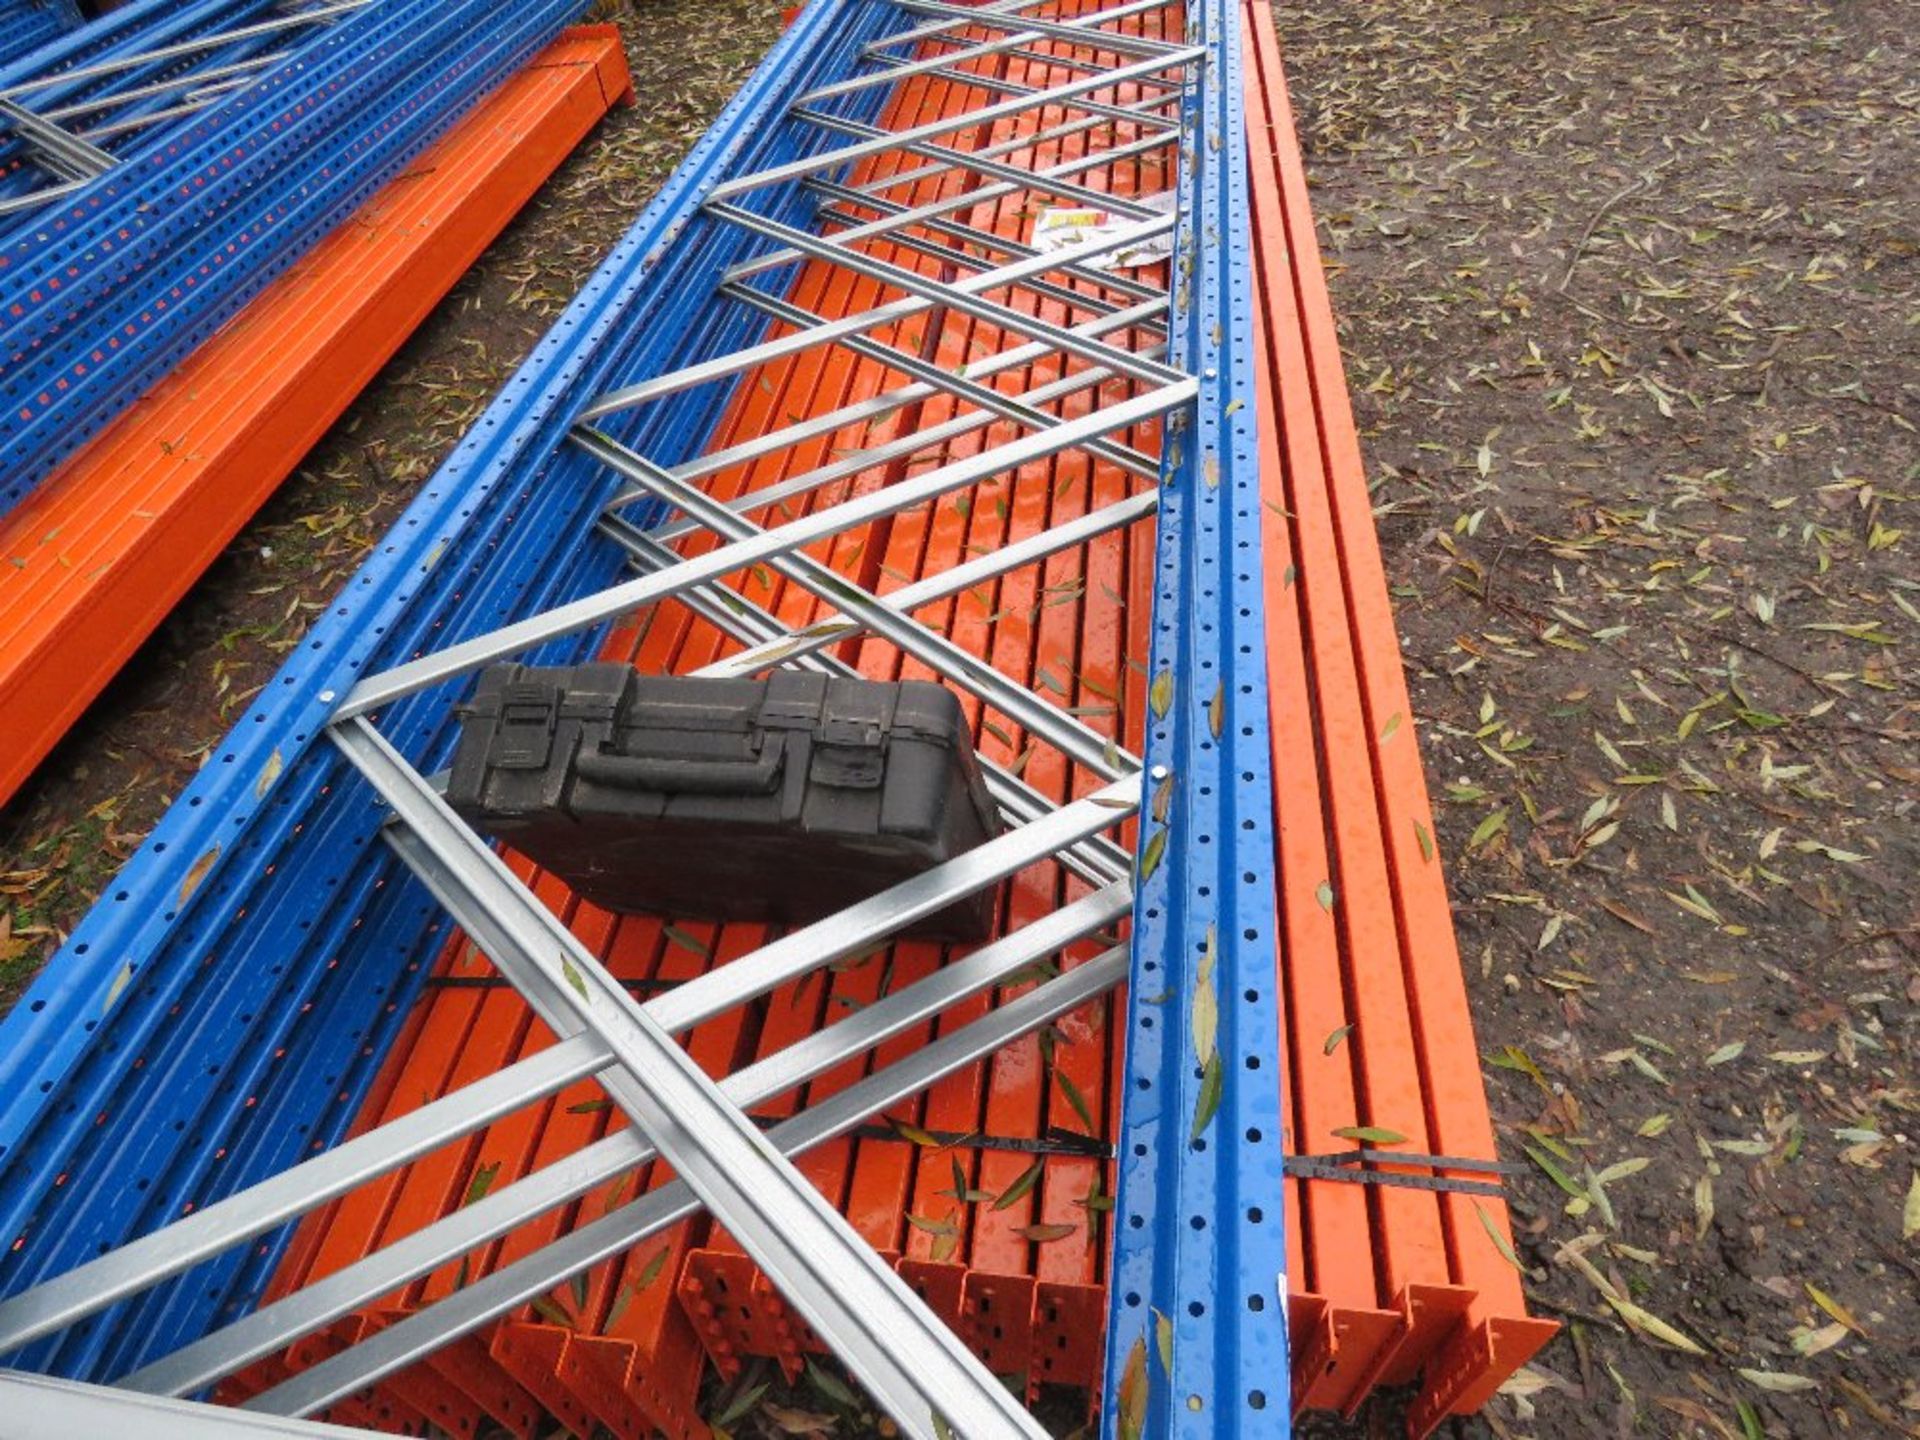 HEAVY DUTY PALLET RACKING: 5 X UPRIGHTS @ 5M HEIGHT WITH A WIDTH OF 0.9M, PLUS 24NO BEAMS @ 3.9M LEN - Image 2 of 5